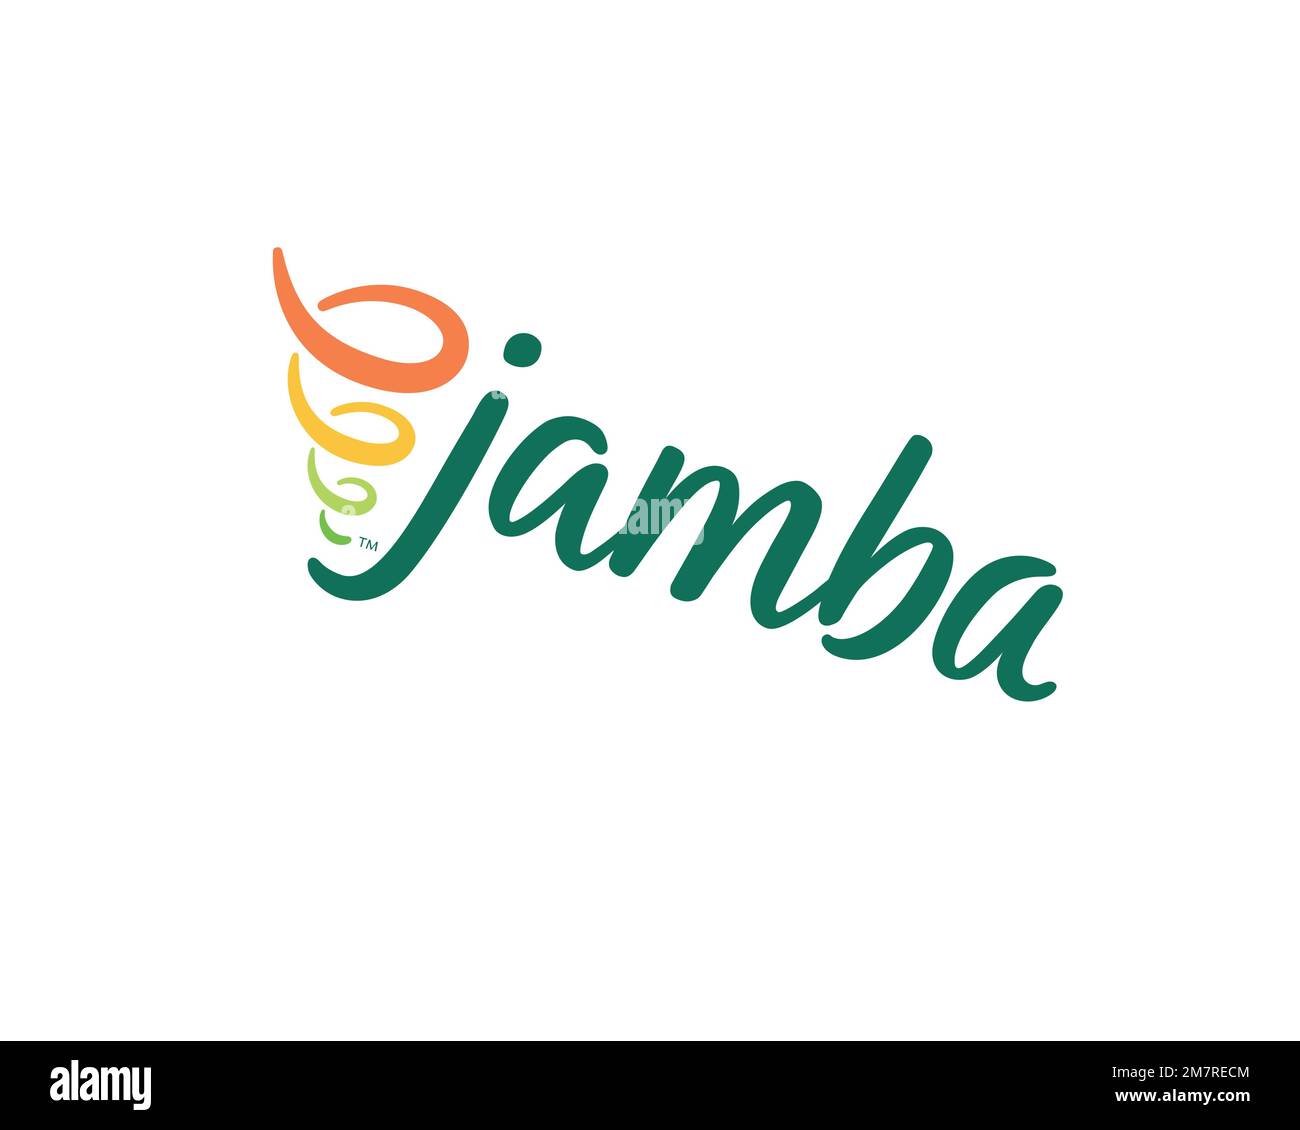 Jamba juice Cut Out Stock Images & Pictures - Alamy